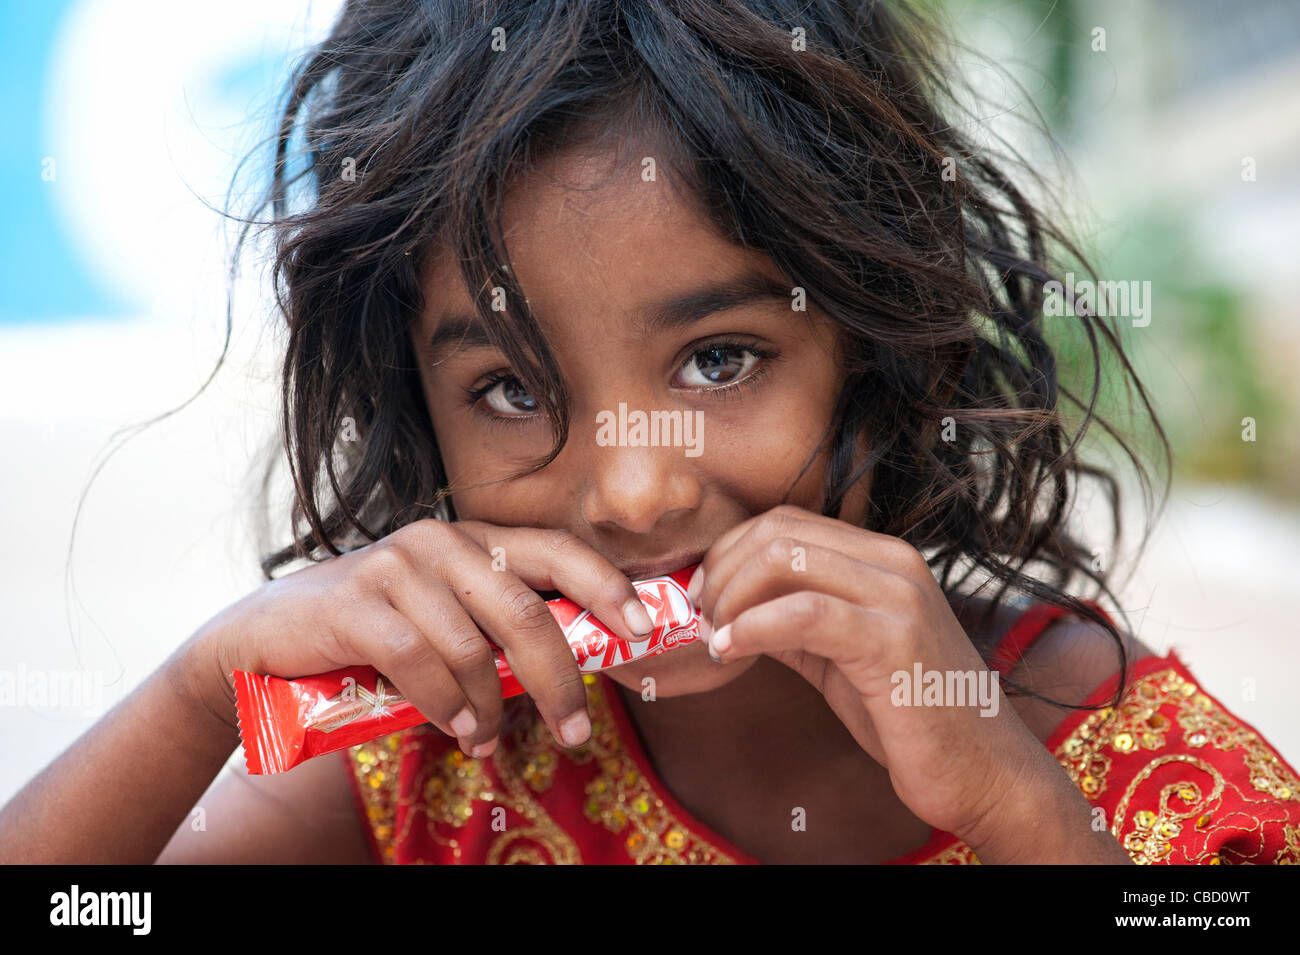 Young poor lower caste Indian street girl holding and eating a chocolate bar. Andhra Pradesh, India Stock Photo